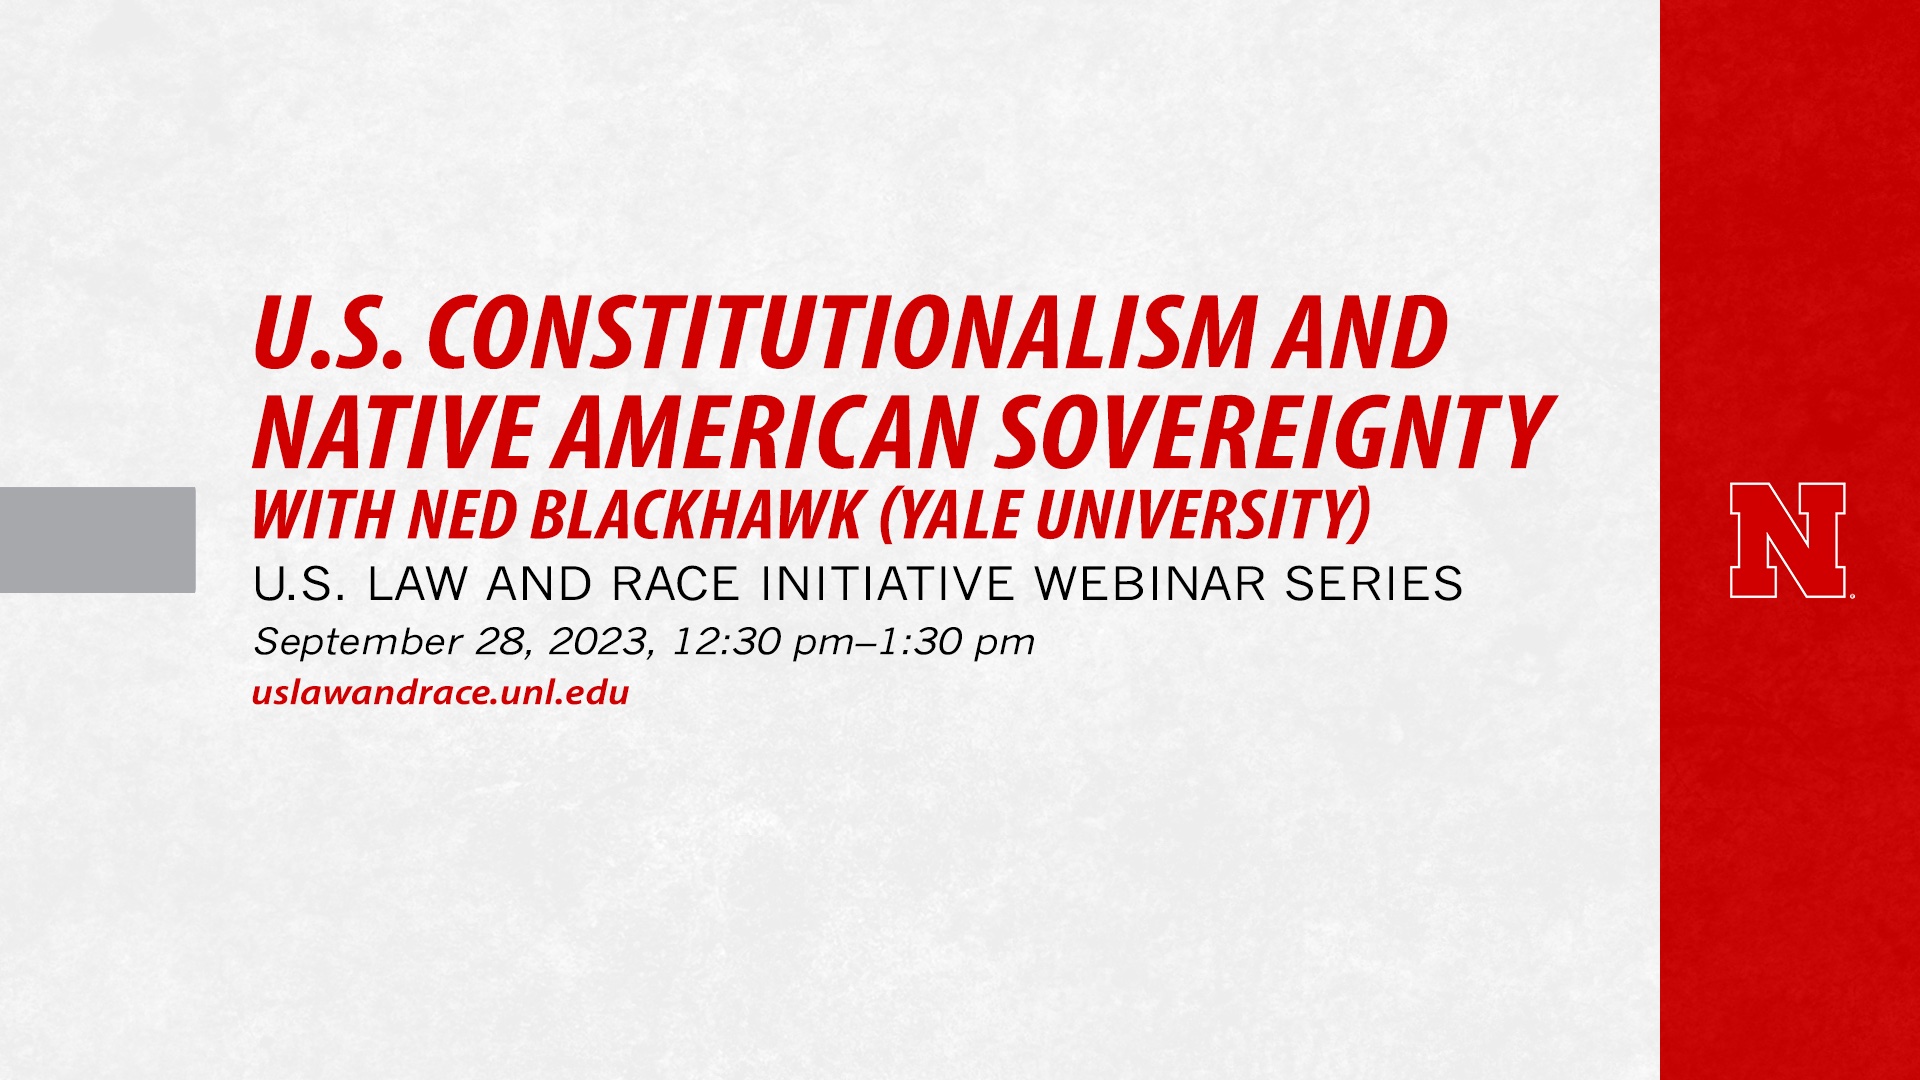 U.S. Constitutionalism and Native American Sovereignty